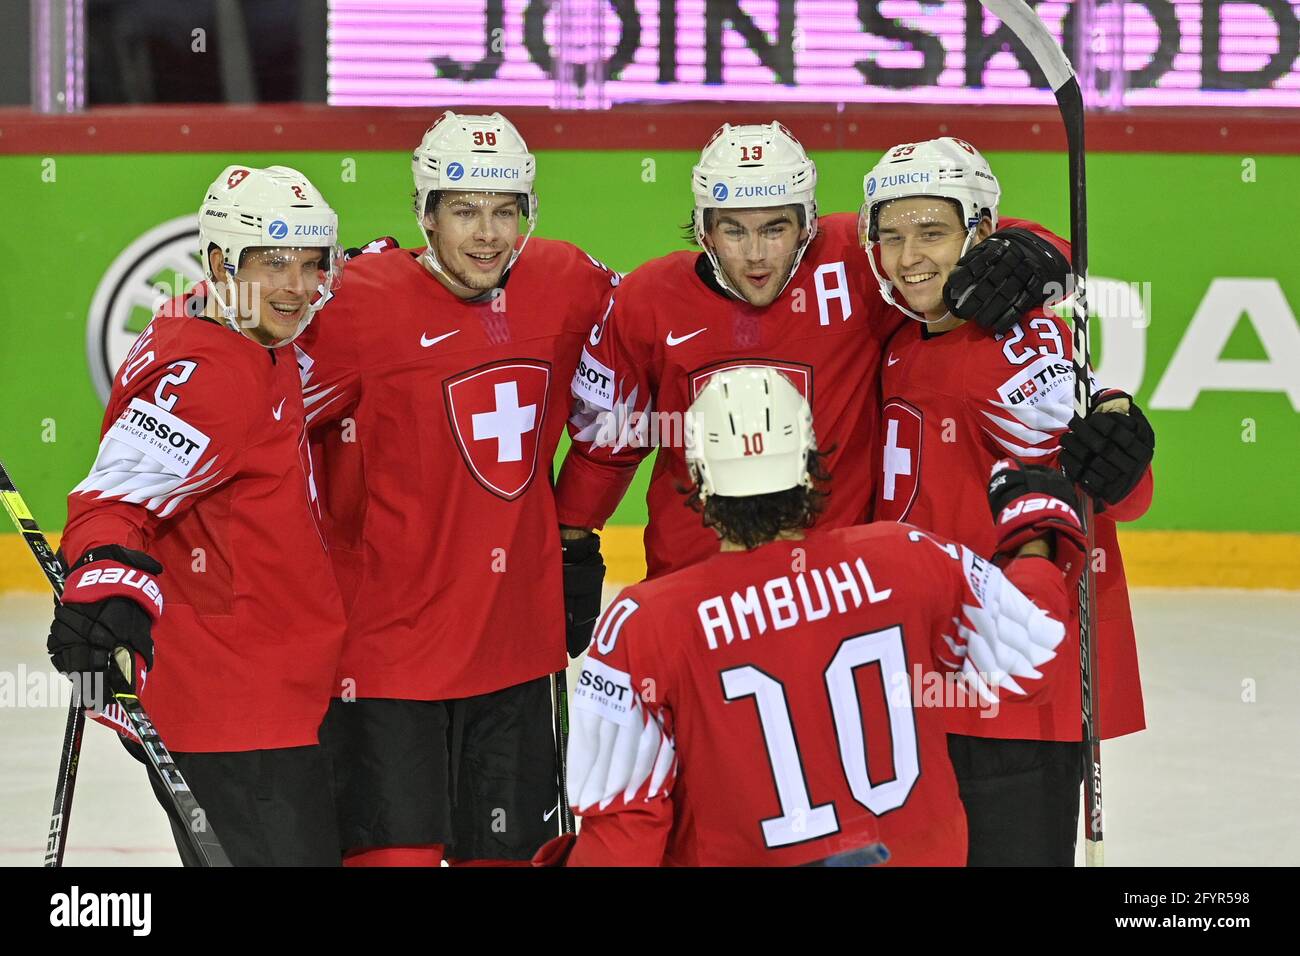 Nico Hischier of Switzerland, right, celebrates after scoring his sides 4th goal during the group A Hockey World Championship match between Switzerland and Slovakia in Helsinki, Finland, Wednesday May 18, 2022